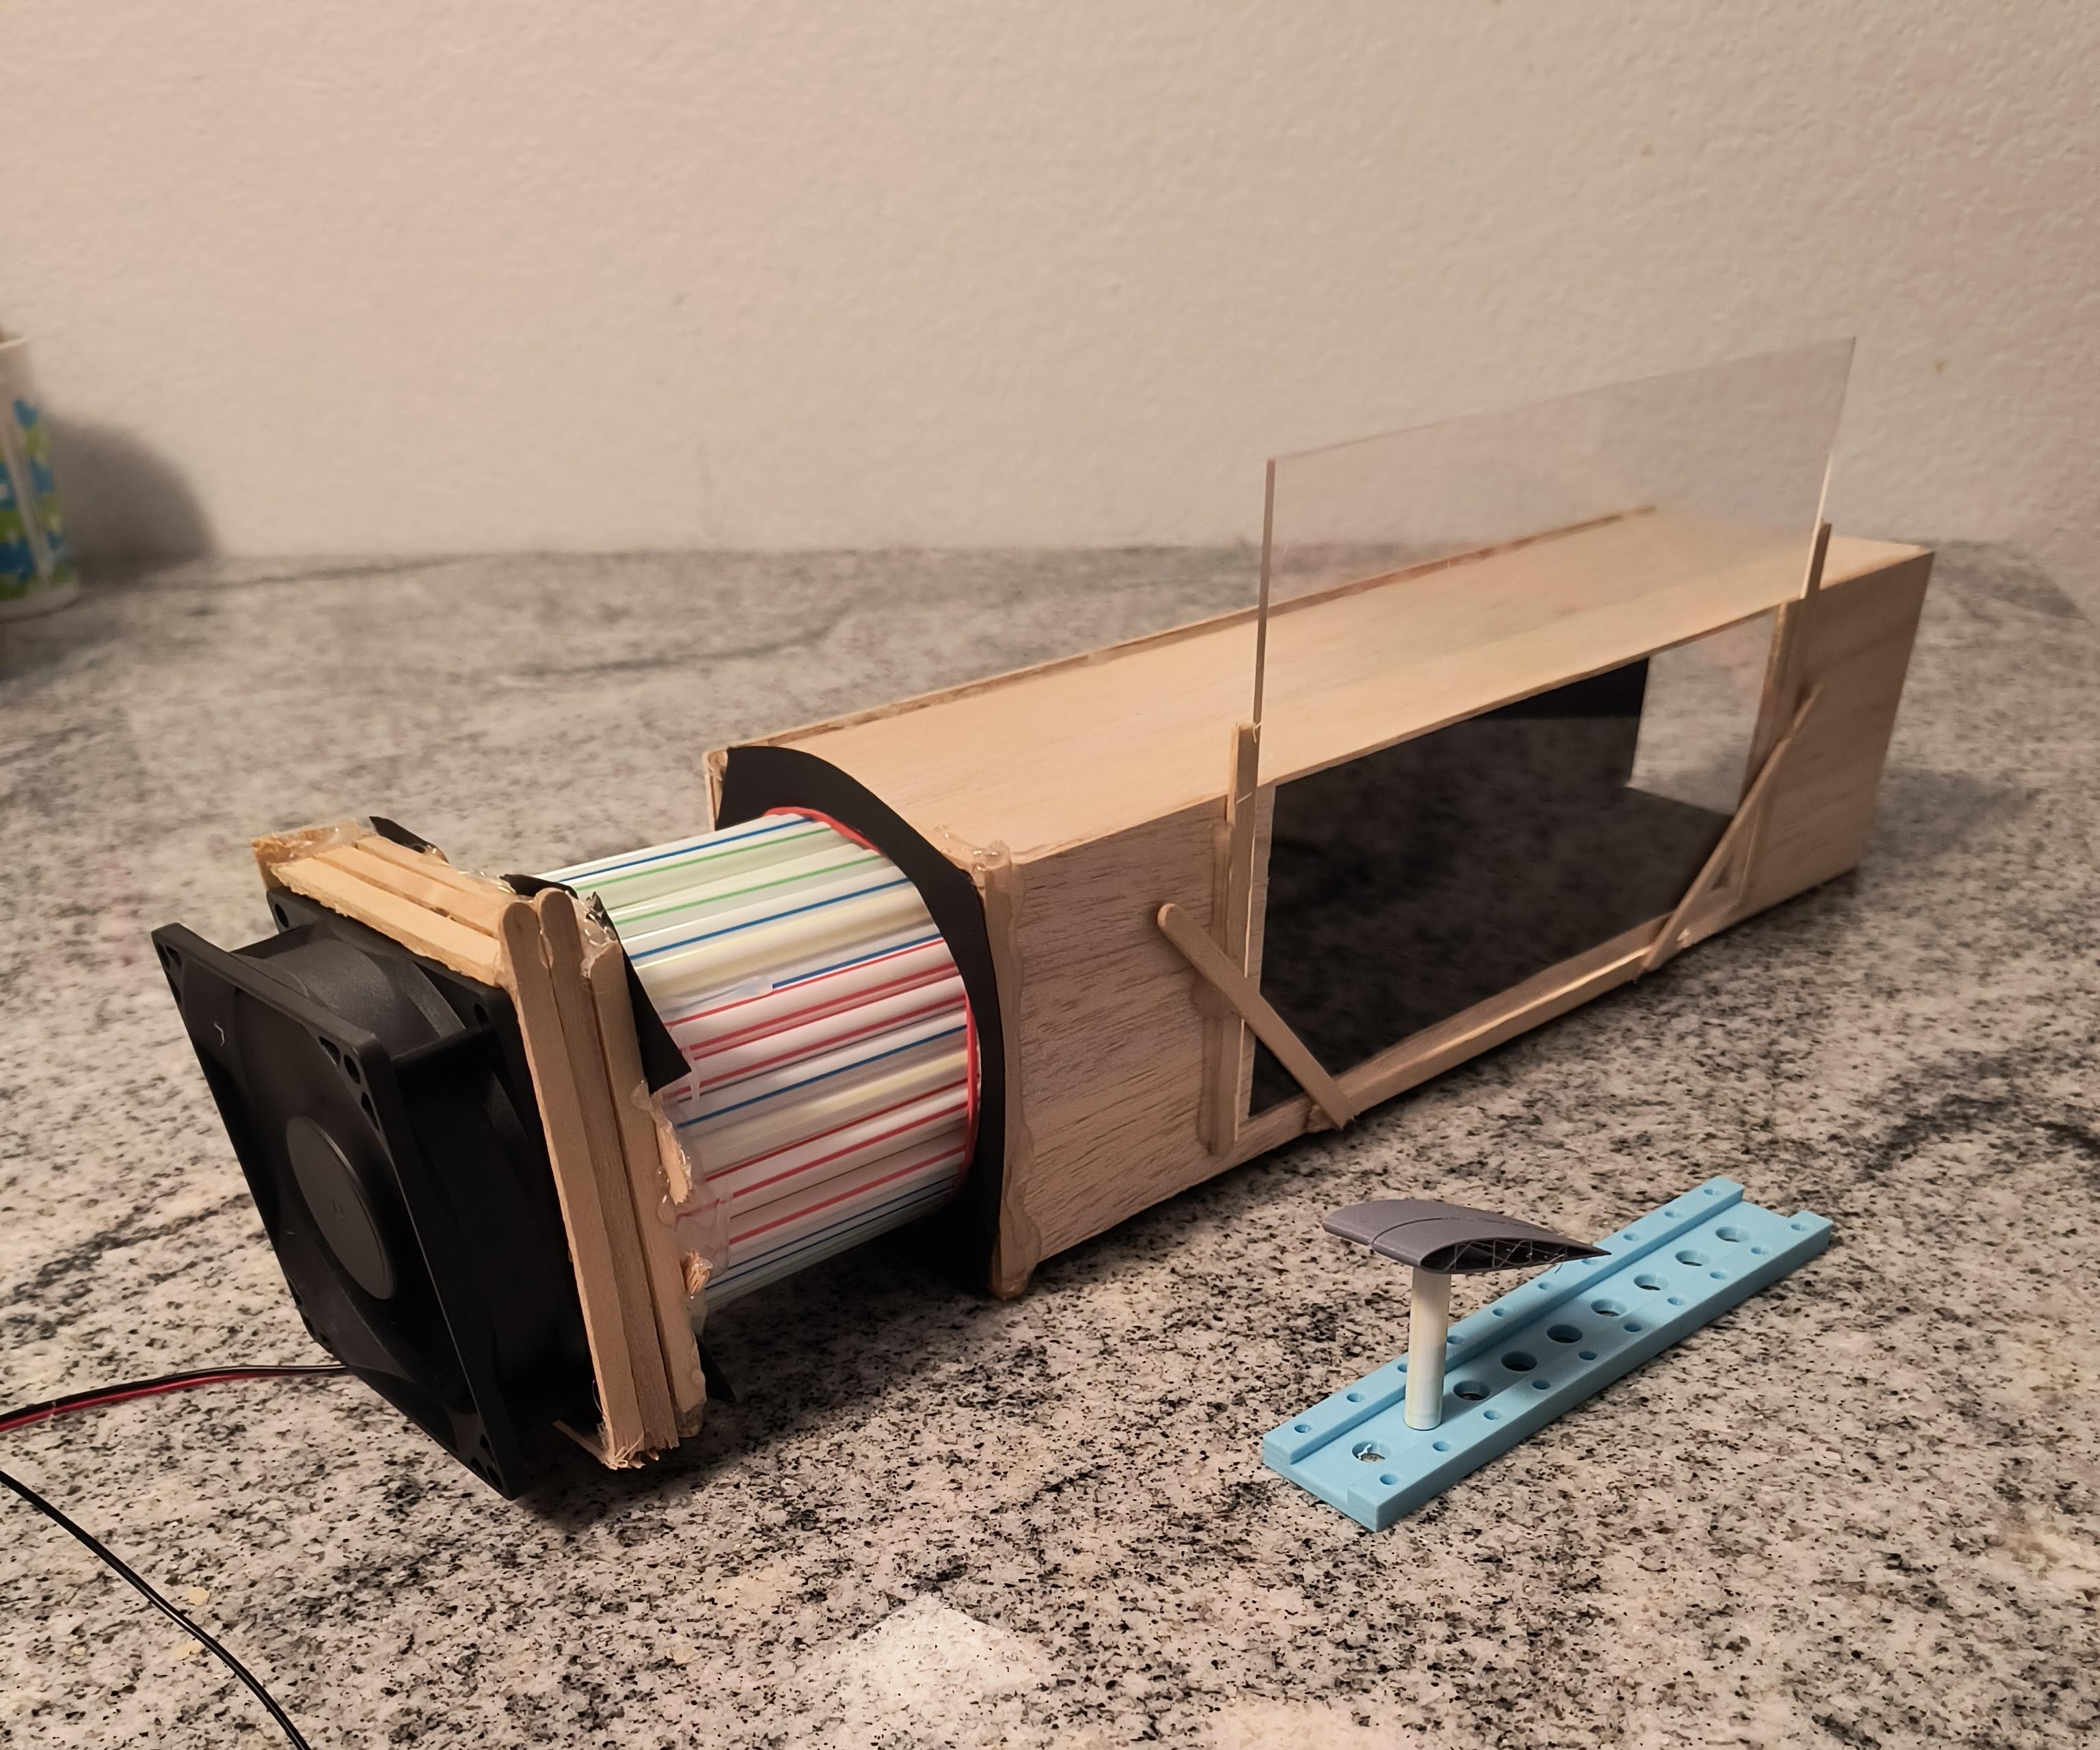 Wind Tunnel for Small Models